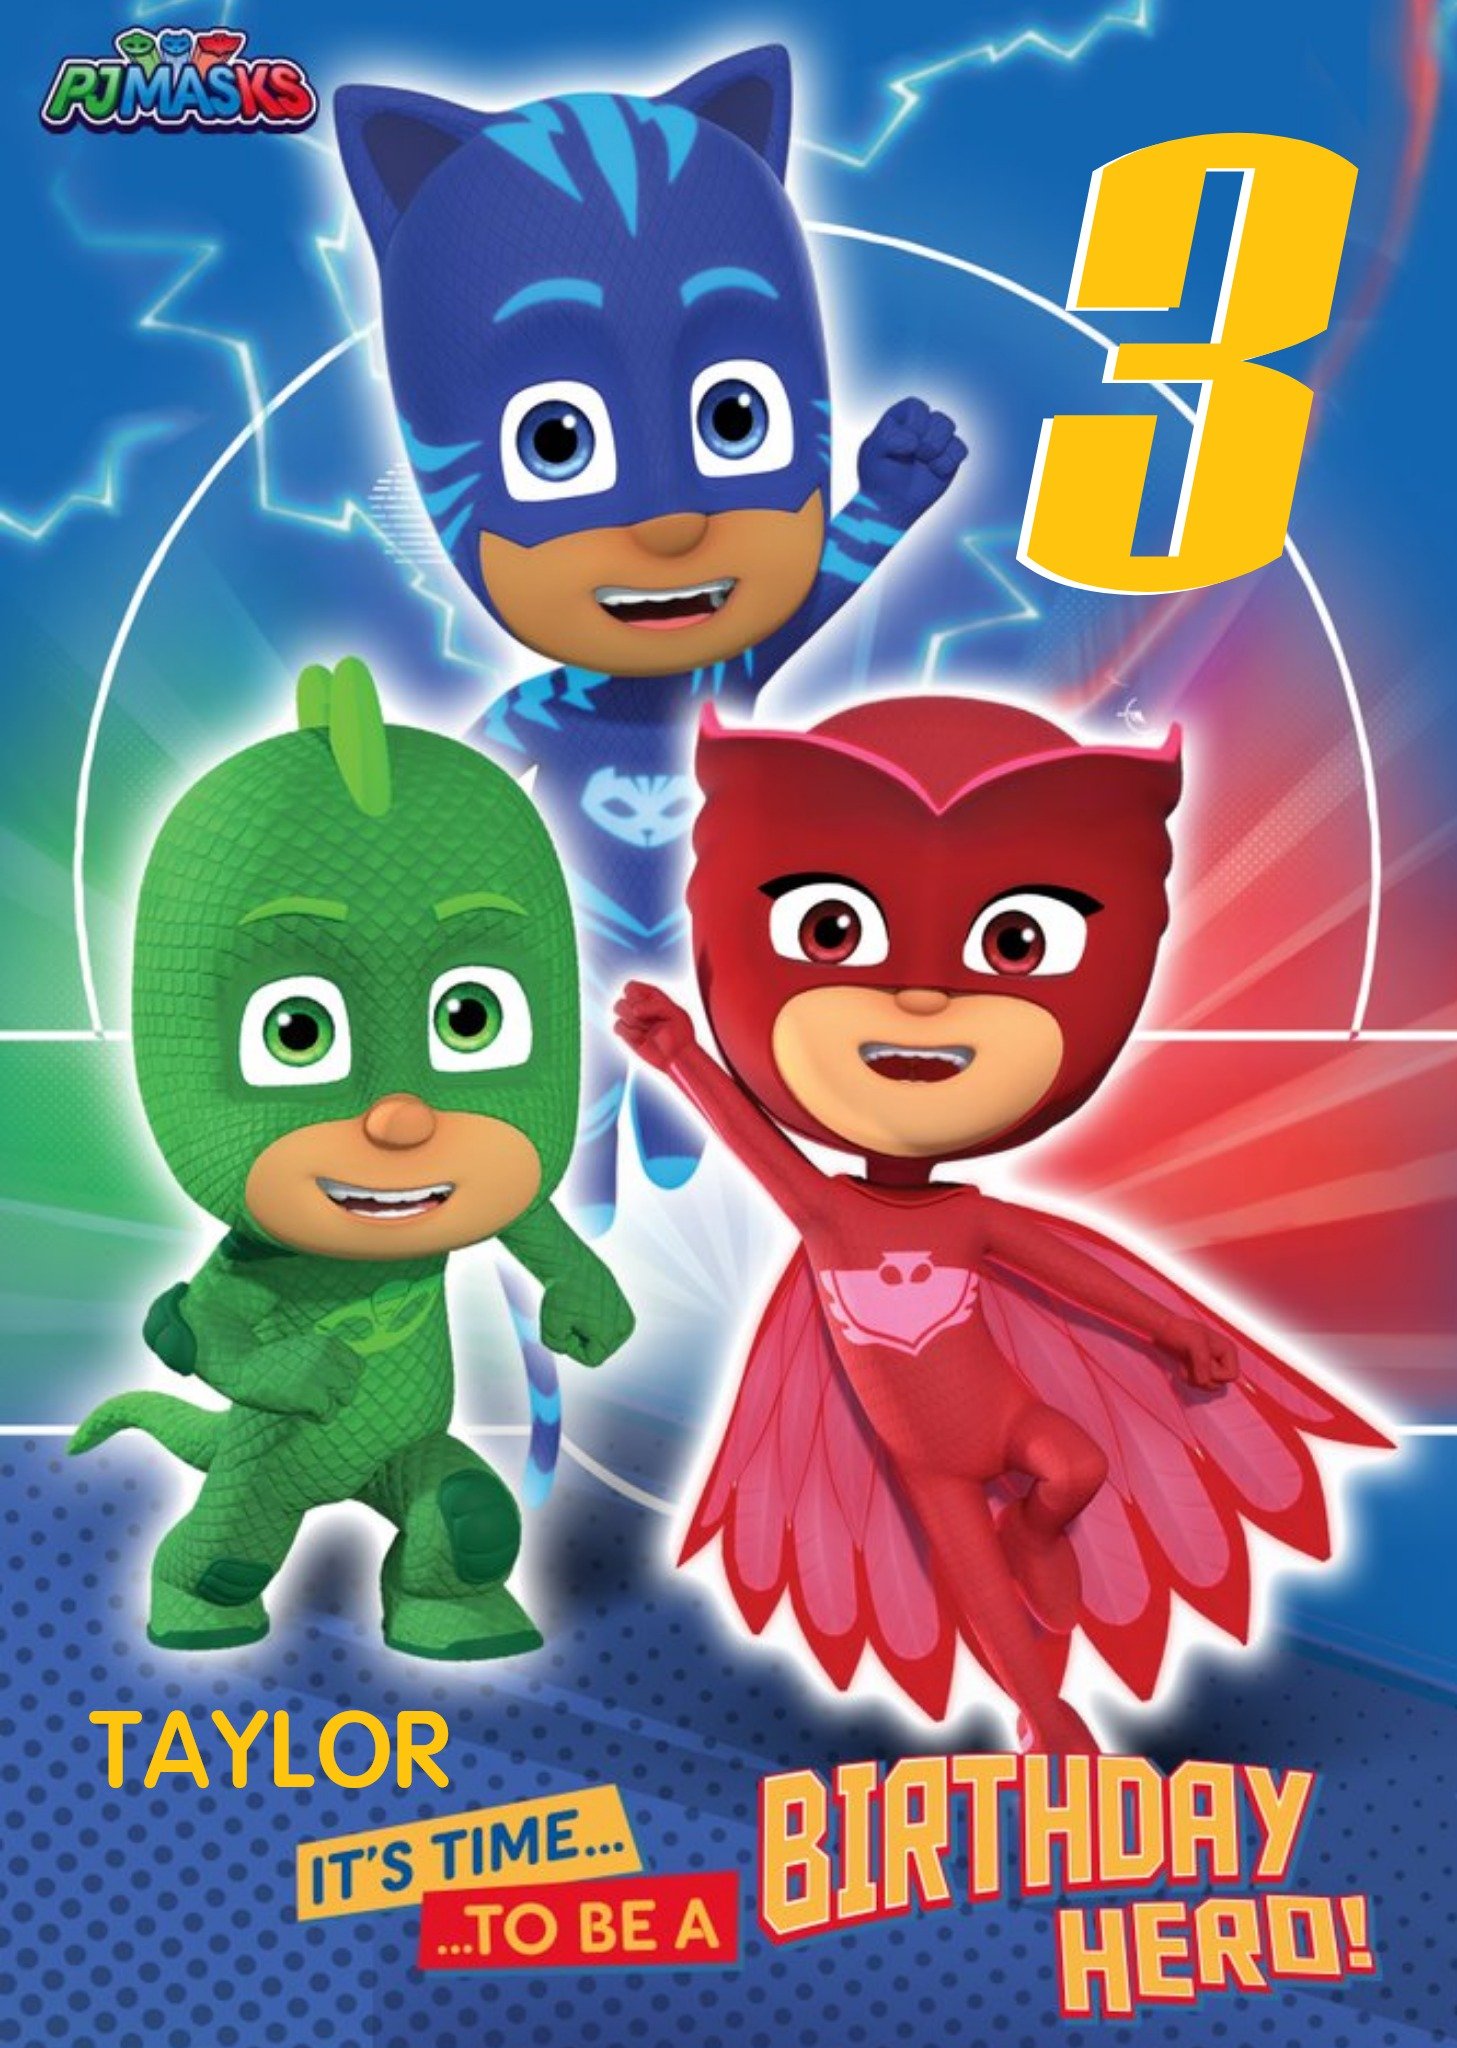 Pj Masks Birthday Card - Age 3 - It's Time To Be A Birthday Hero, Large